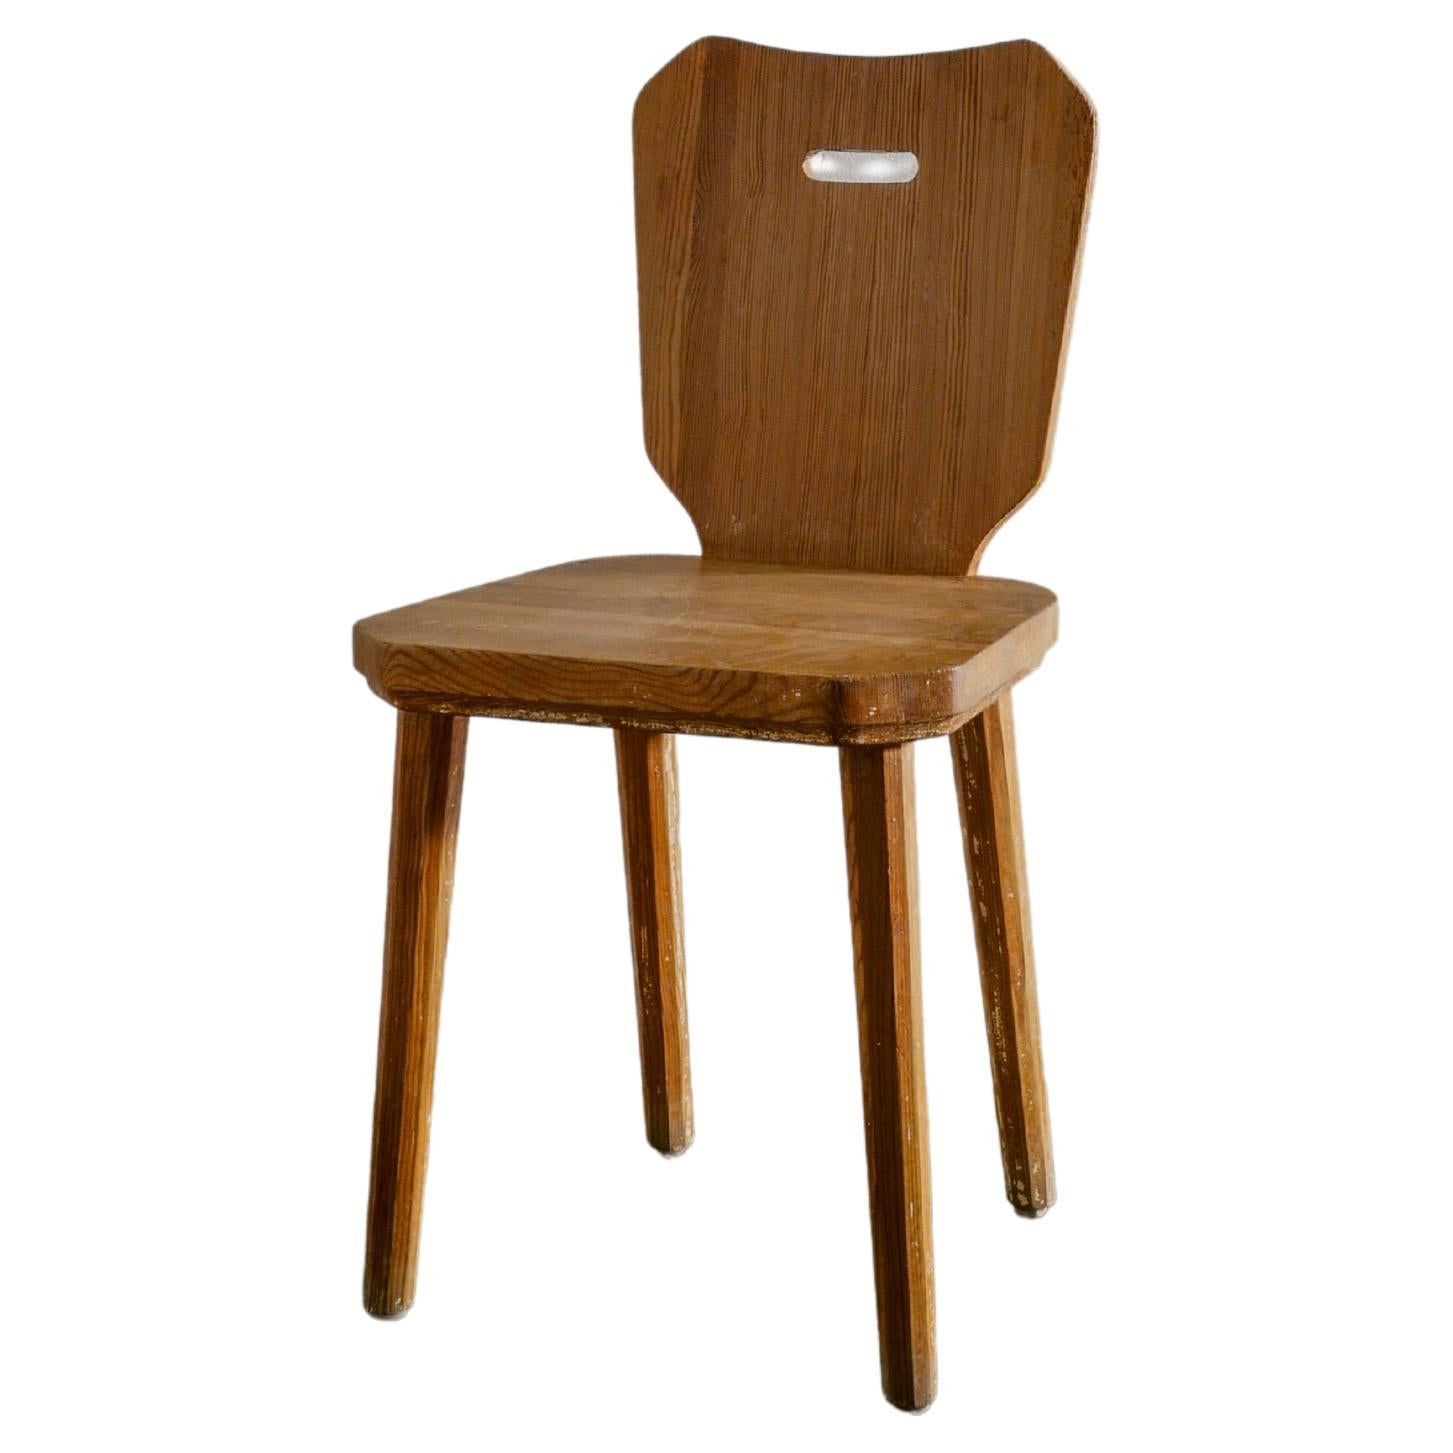 Göran Malmvall Dining Office Chair in Pine Produced in Sweden, 1940s